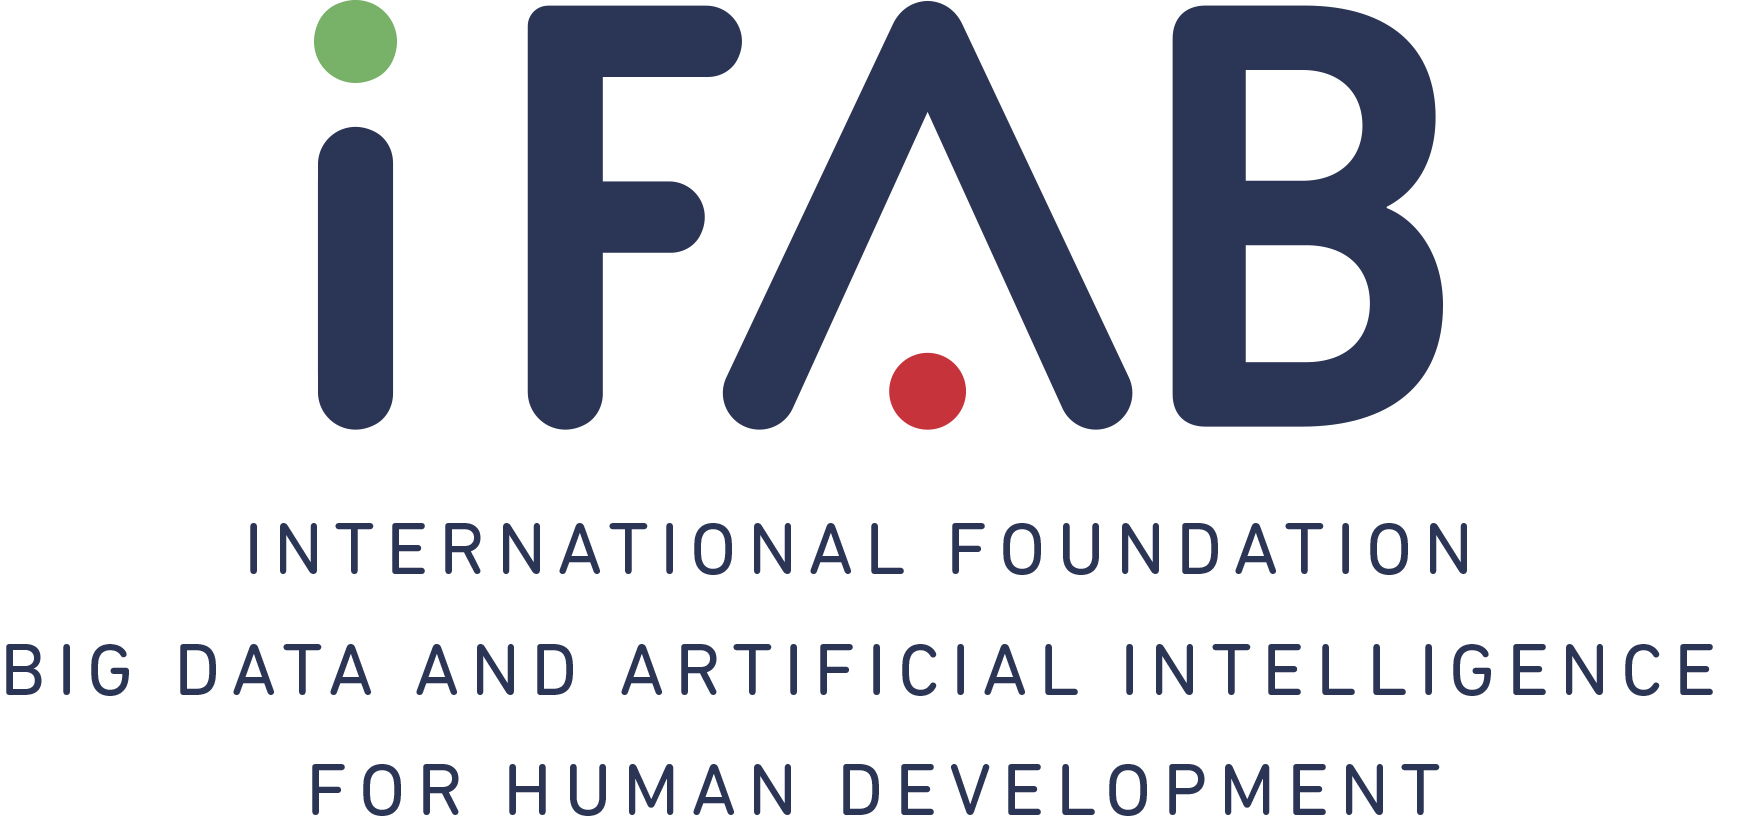 Logo of the International Foundation Big Data and Artificial Intelligence for Human Development and its partnership with Agile Lab.